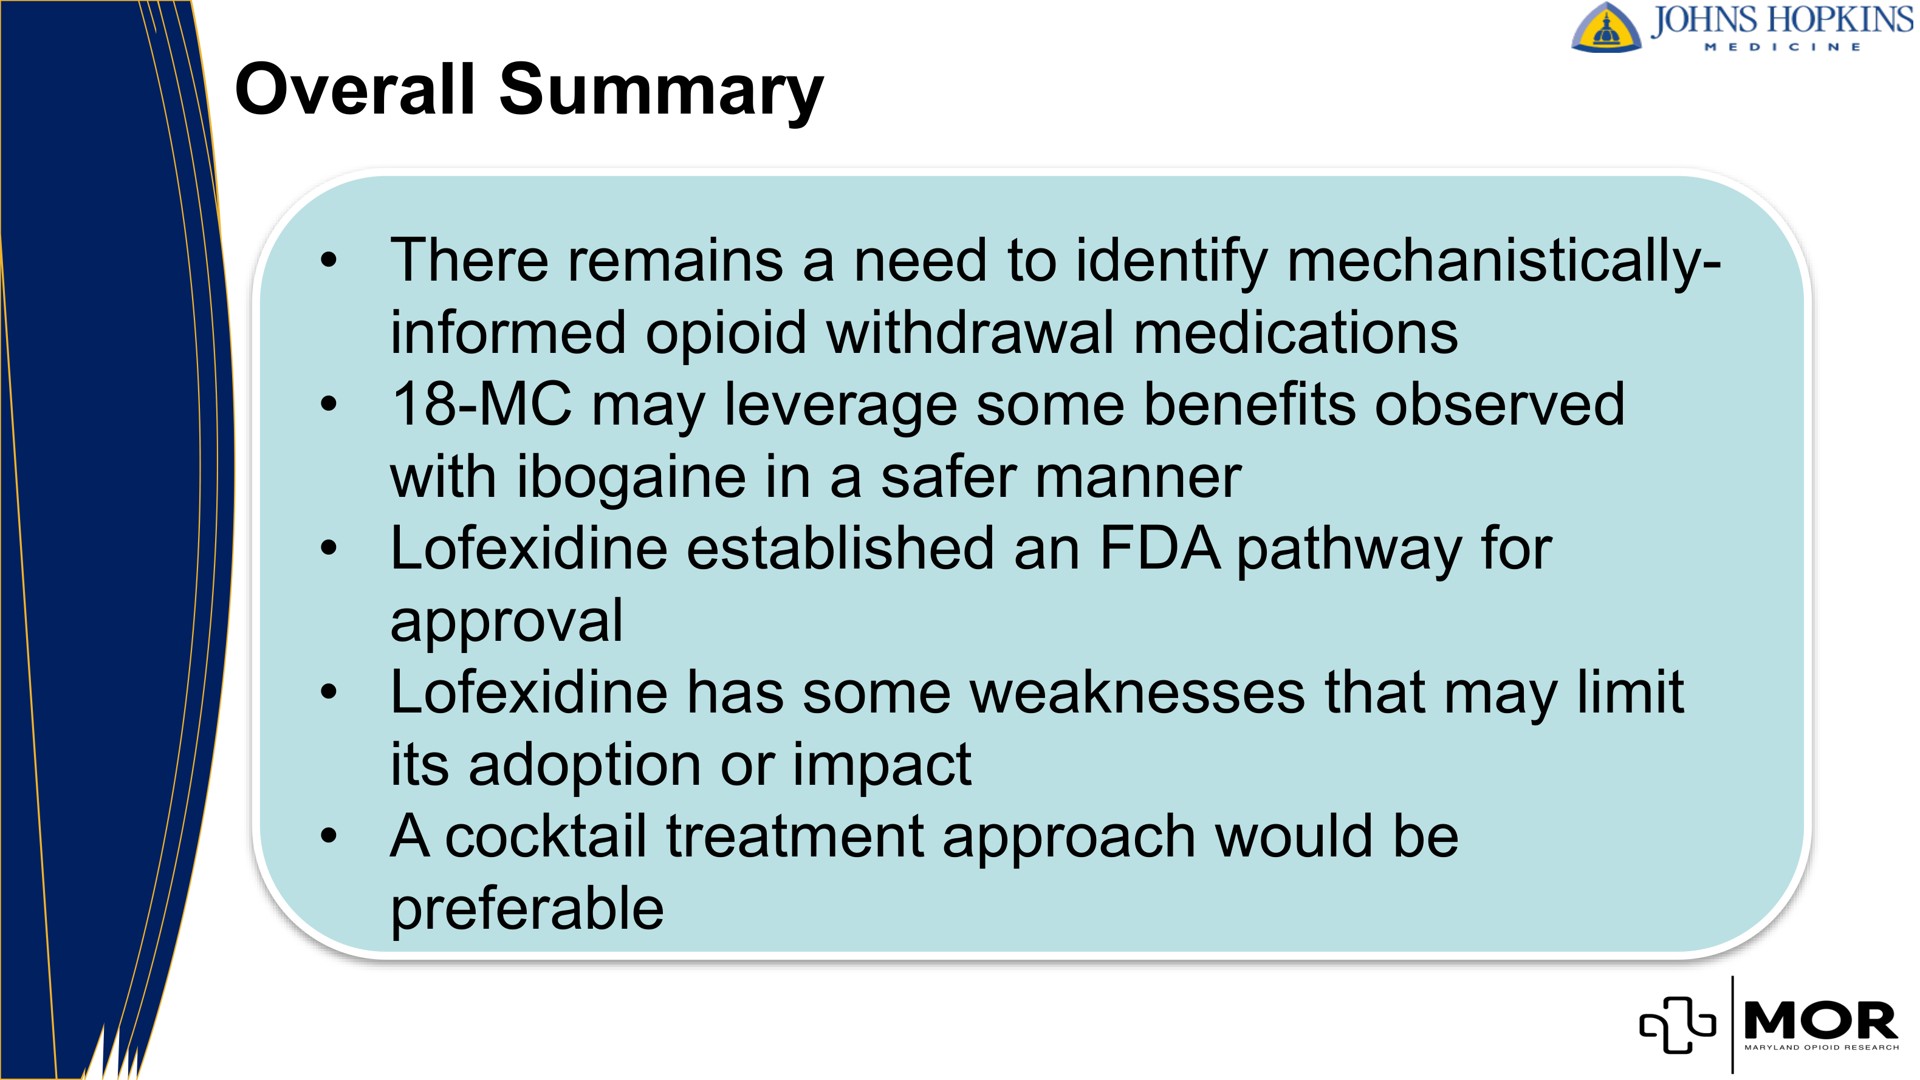 overall summary there remains a need to identify mechanistically informed withdrawal medications may leverage some benefits observed with in a manner established an pathway for approval has some weaknesses that may limit its adoption or impact a cocktail treatment approach would be preferable mor | MindMed